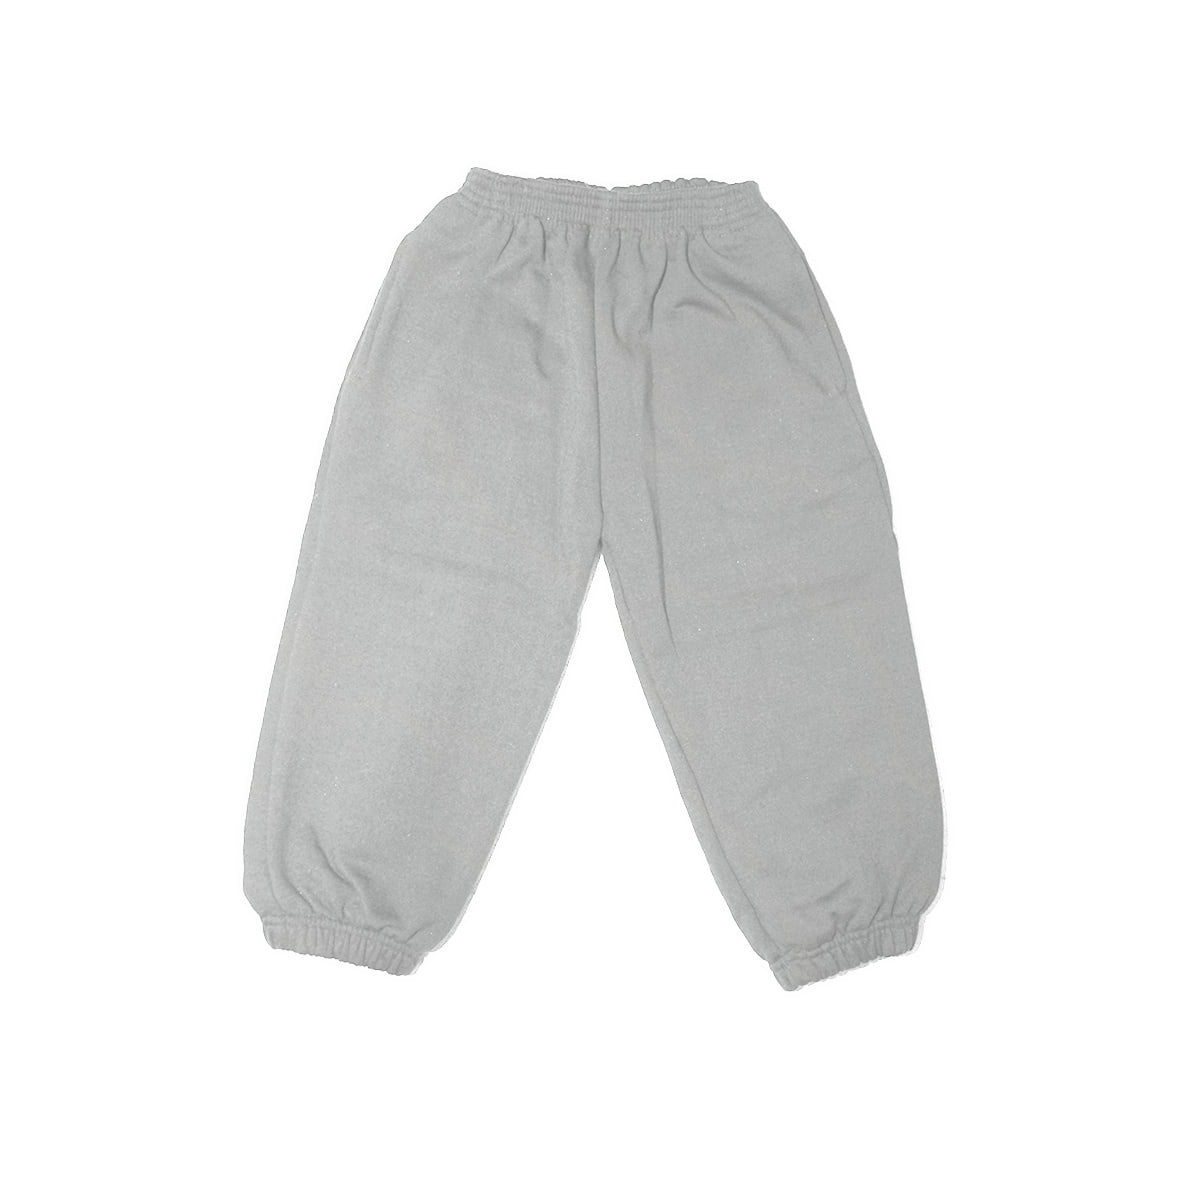 Boys/Kids Jogging Bottoms Tracksuit School PE Cotton Casual Trousers 7-16 Years 